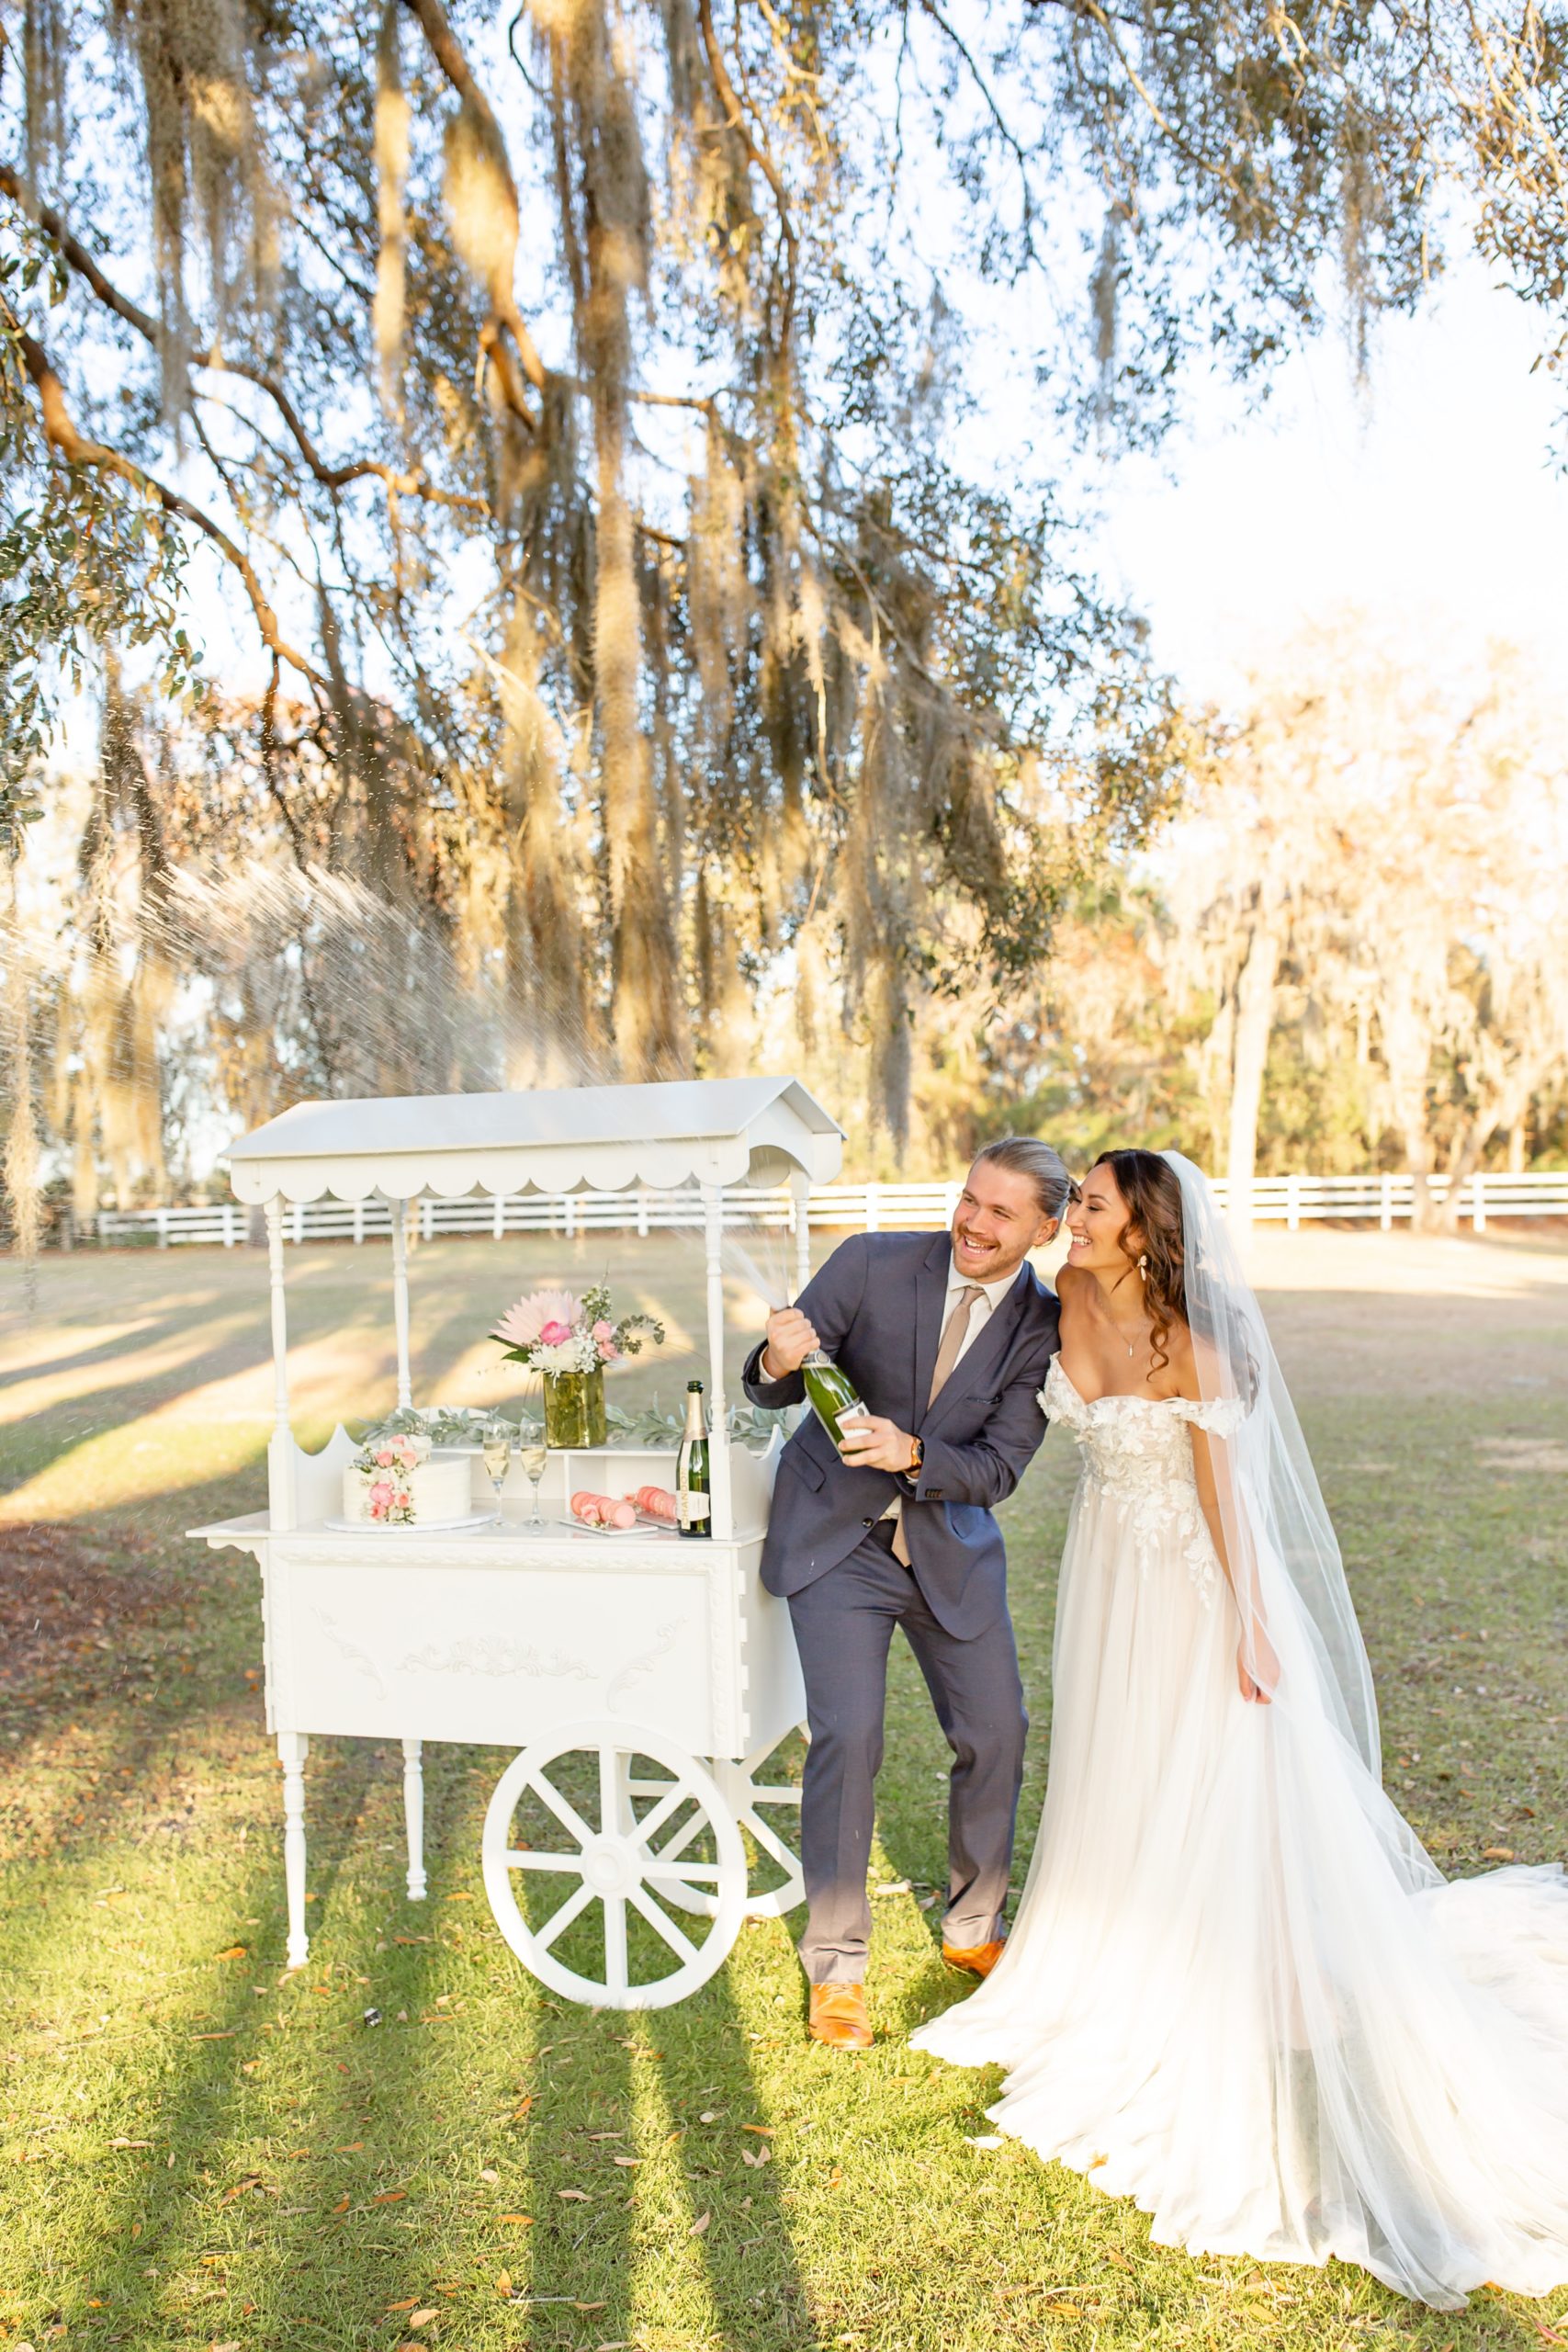 Bramble Tree Estate Wedding Photo — Bride and Groom celebrating and popping champagne with dessert cart under Spanish Moss Trees